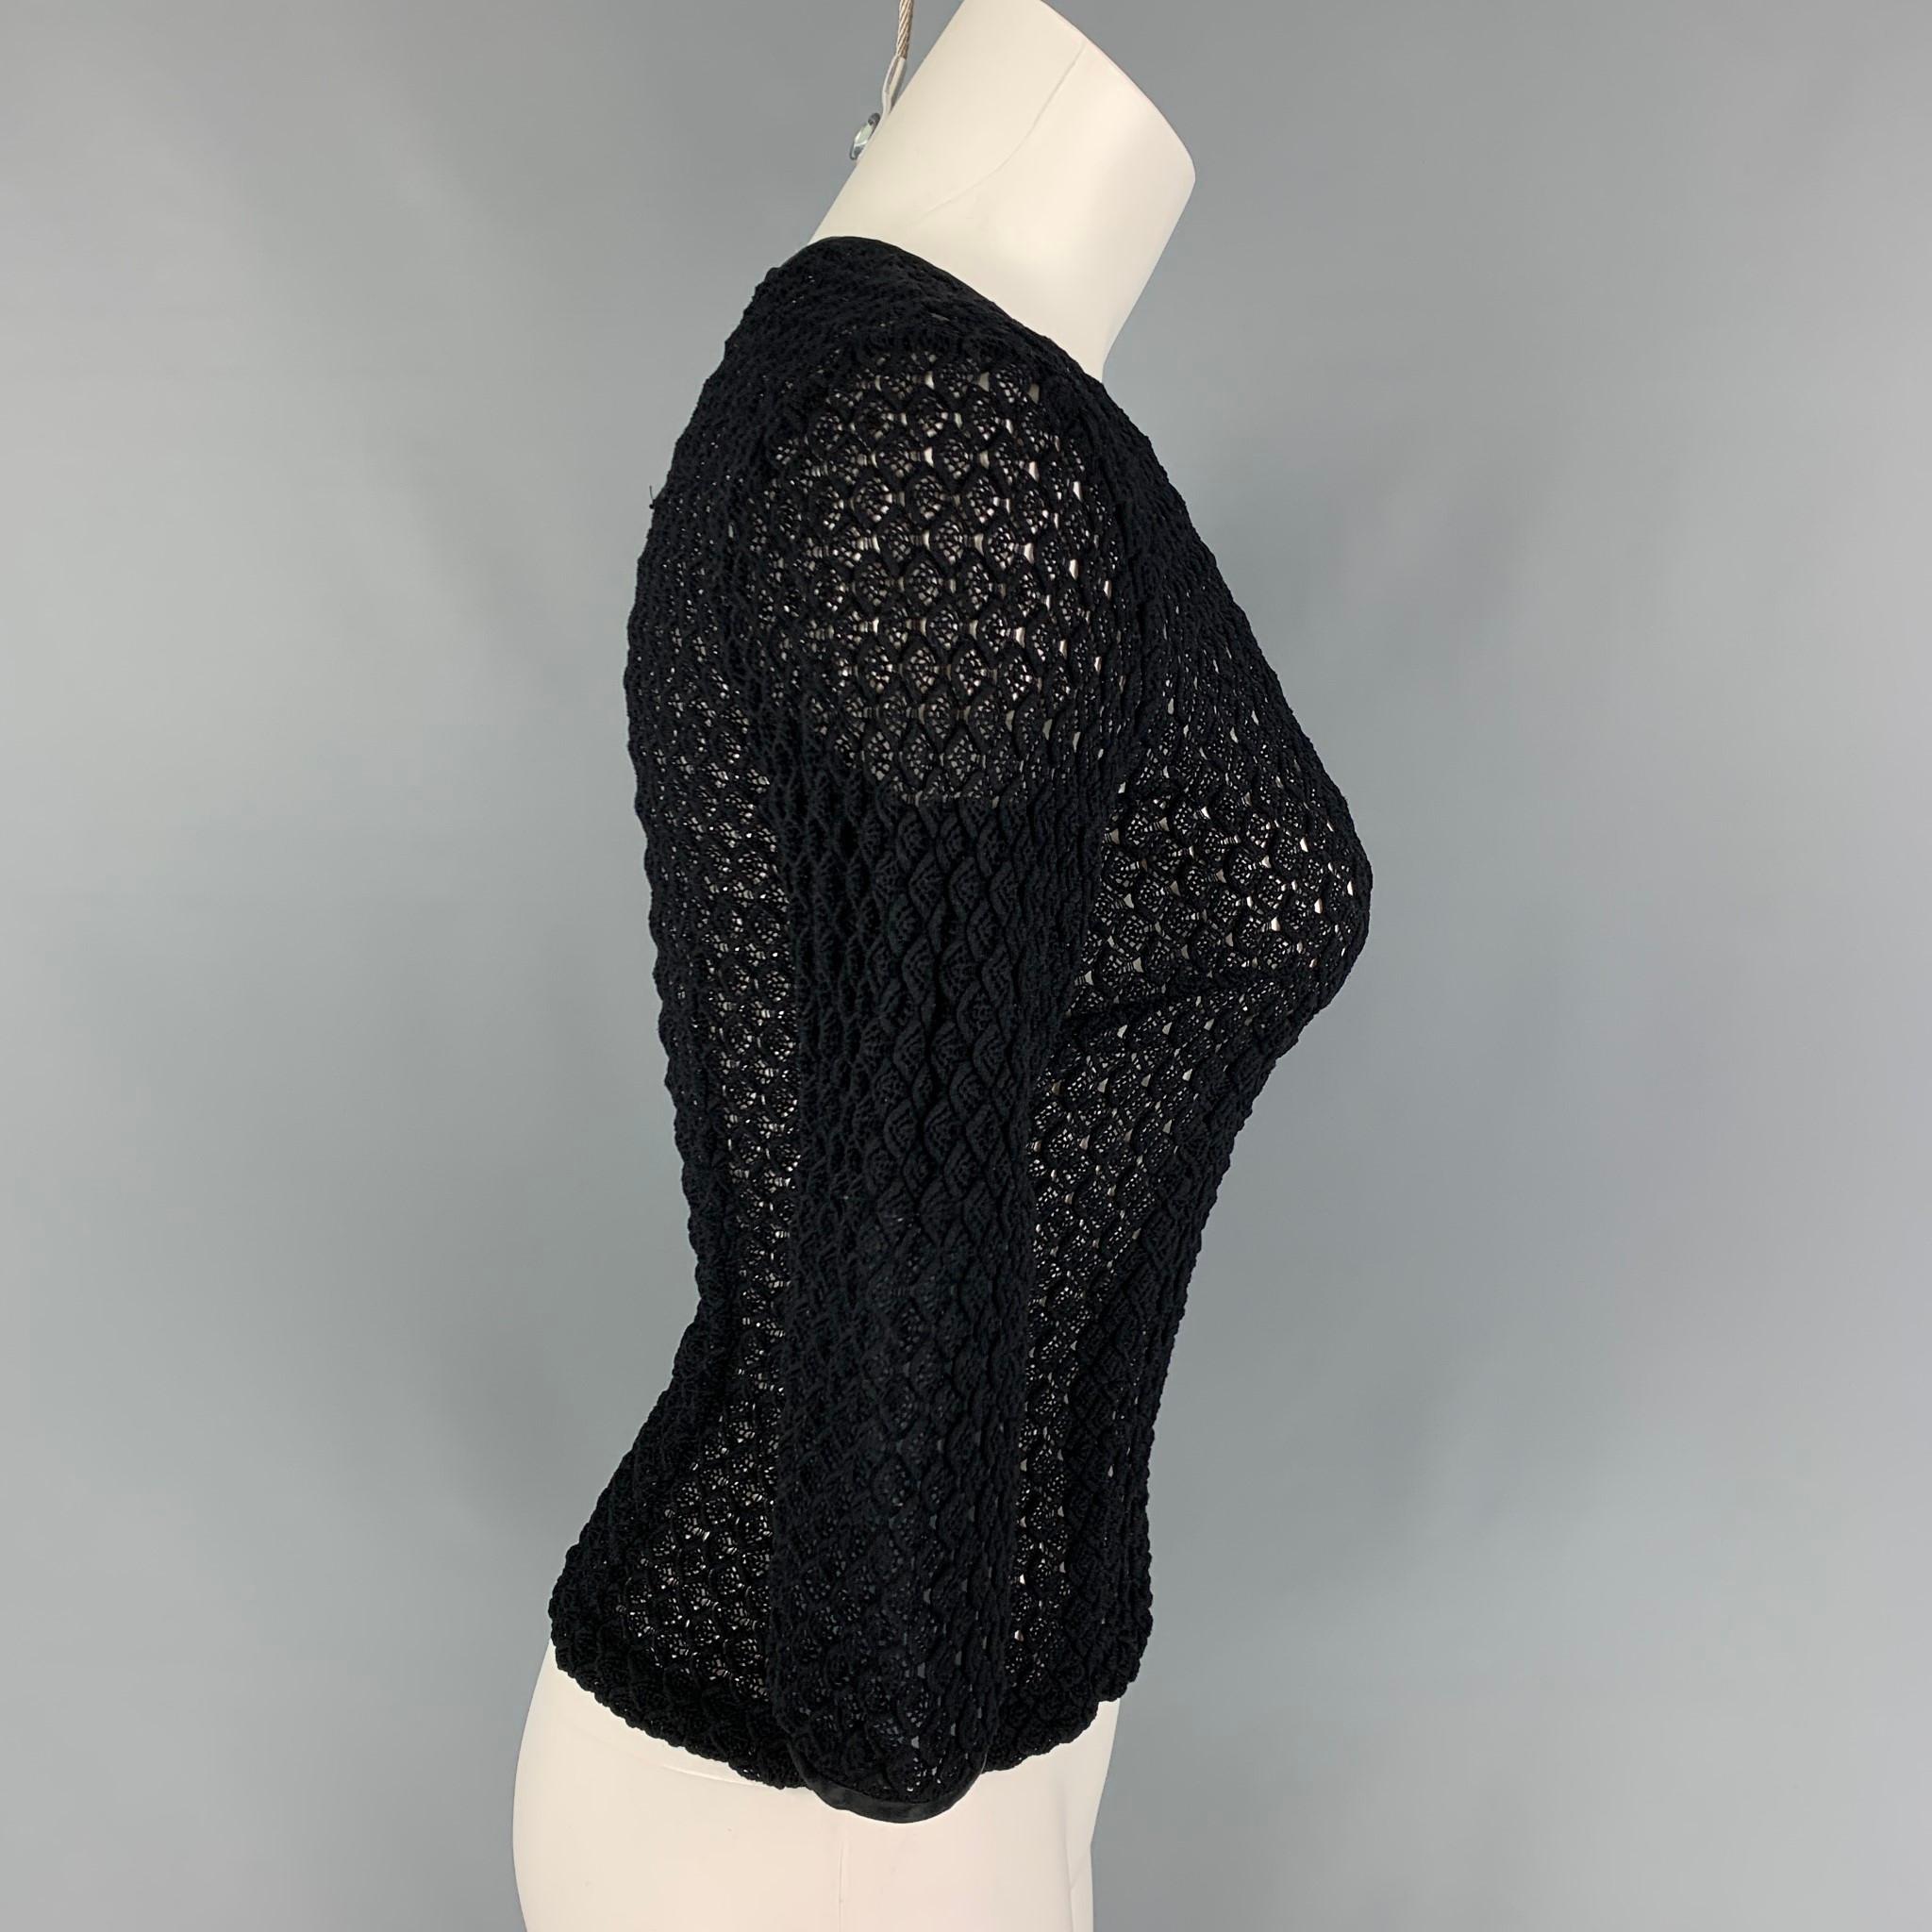 DOLCE & GABBANA dress top comes in a black knitted see through material featuring 3/4 sleeves, satin trim, and a back hook & loop closure. 

Very Good Pre-Owned Condition. Fabric tag removed.
Marked: 40

Measurements:

Shoulder: 15 in.
Bust: 30